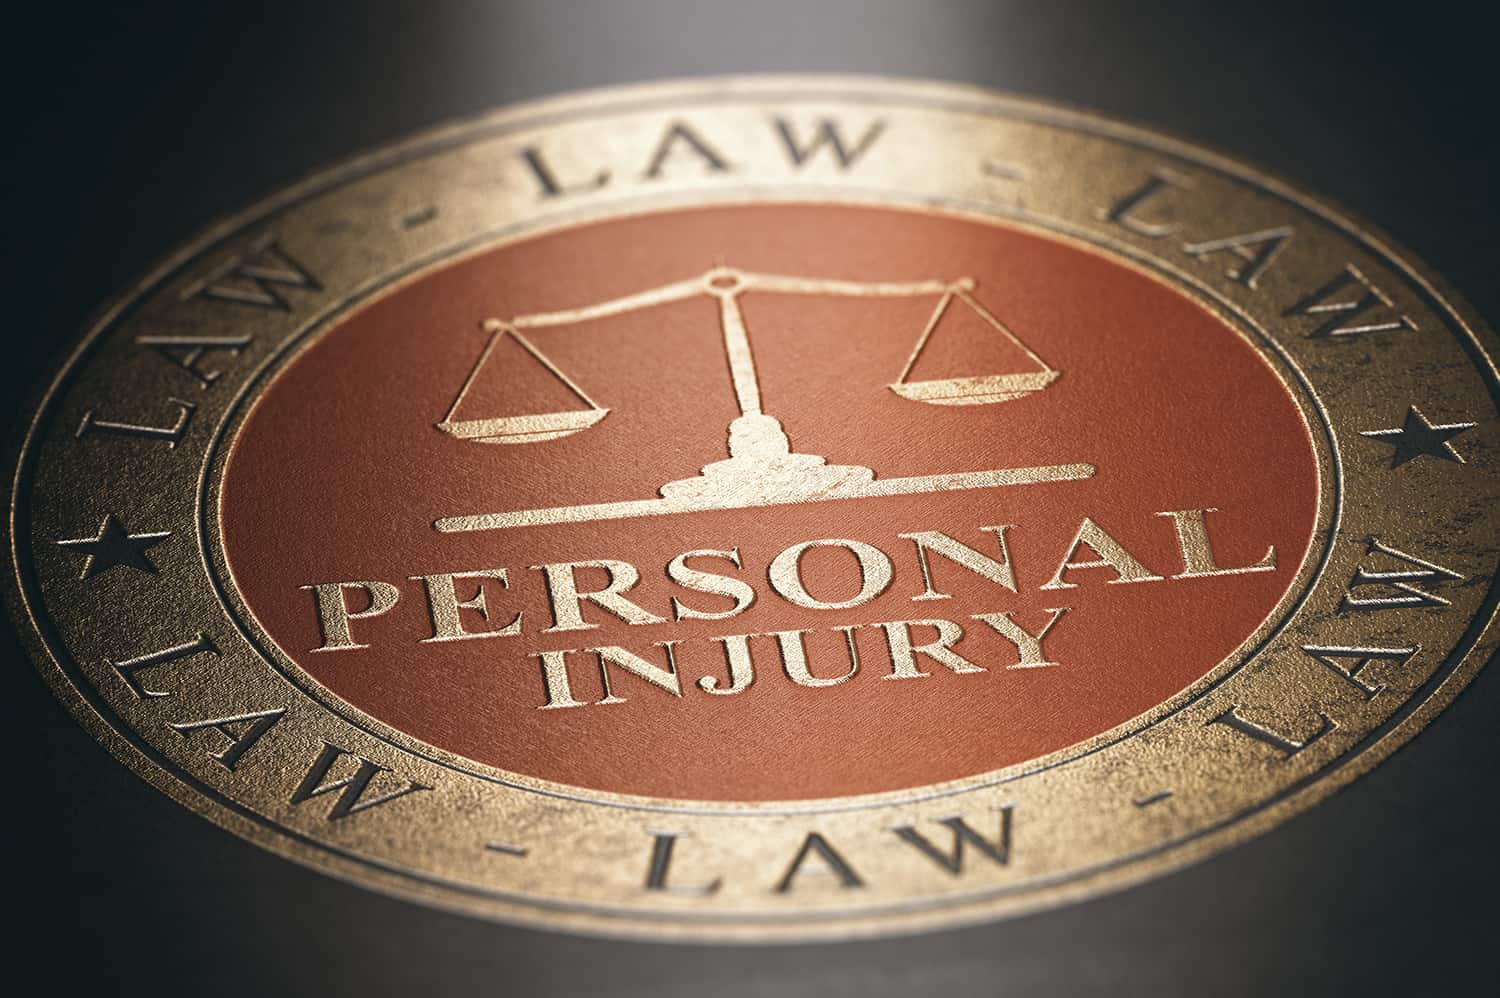 The Surprising Range of Personal Injury Tort Cases